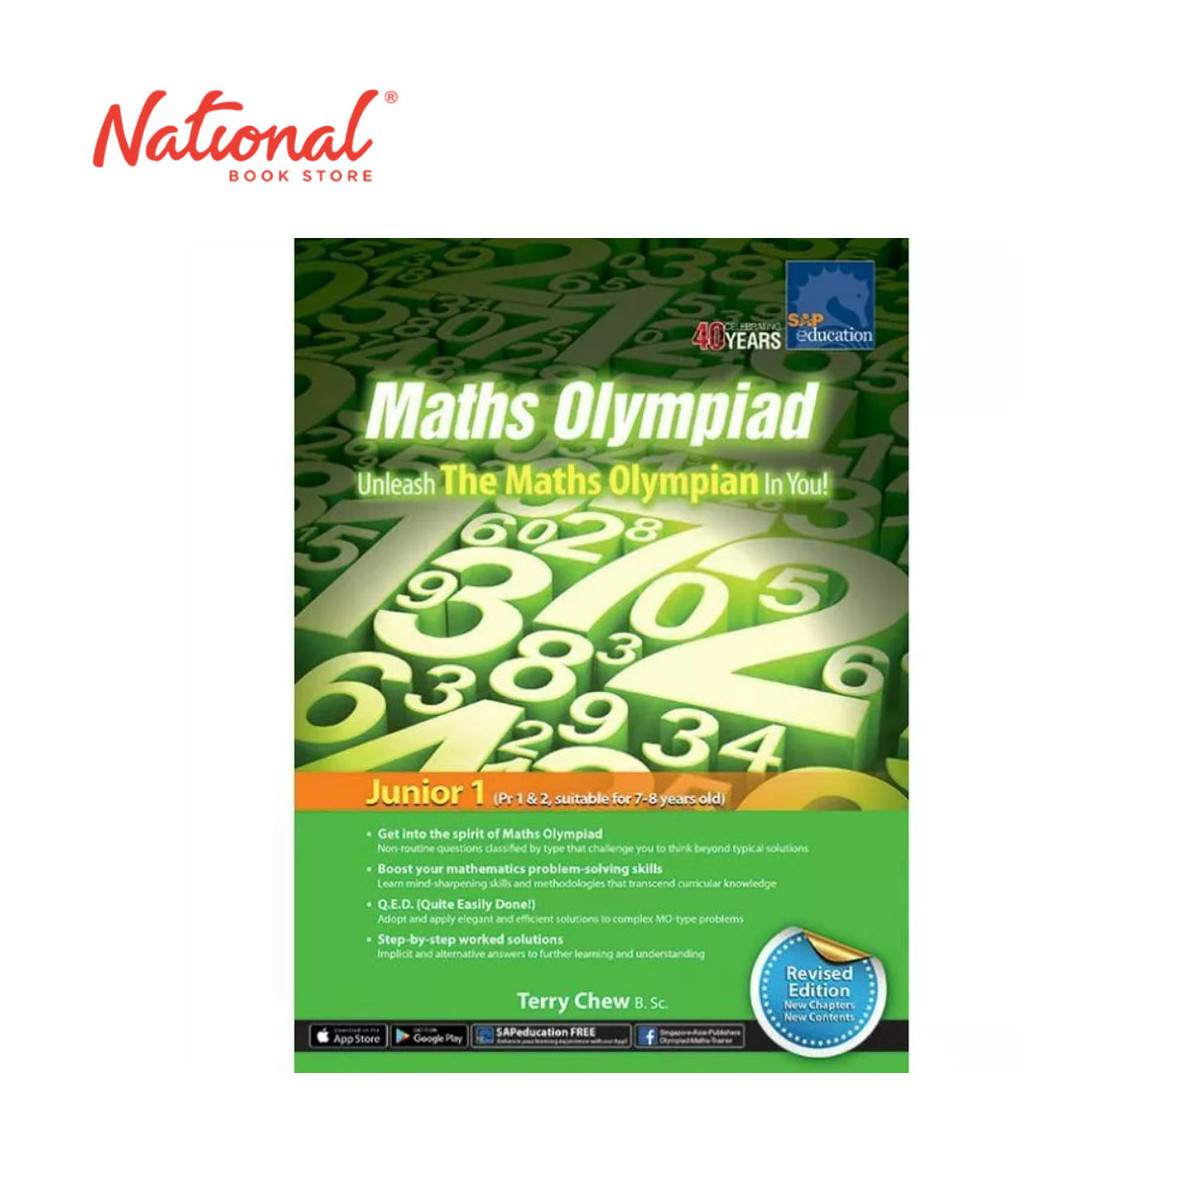 Maths Olympiad Junior 1 by Terry Chew - Trade Paperback - Elementary